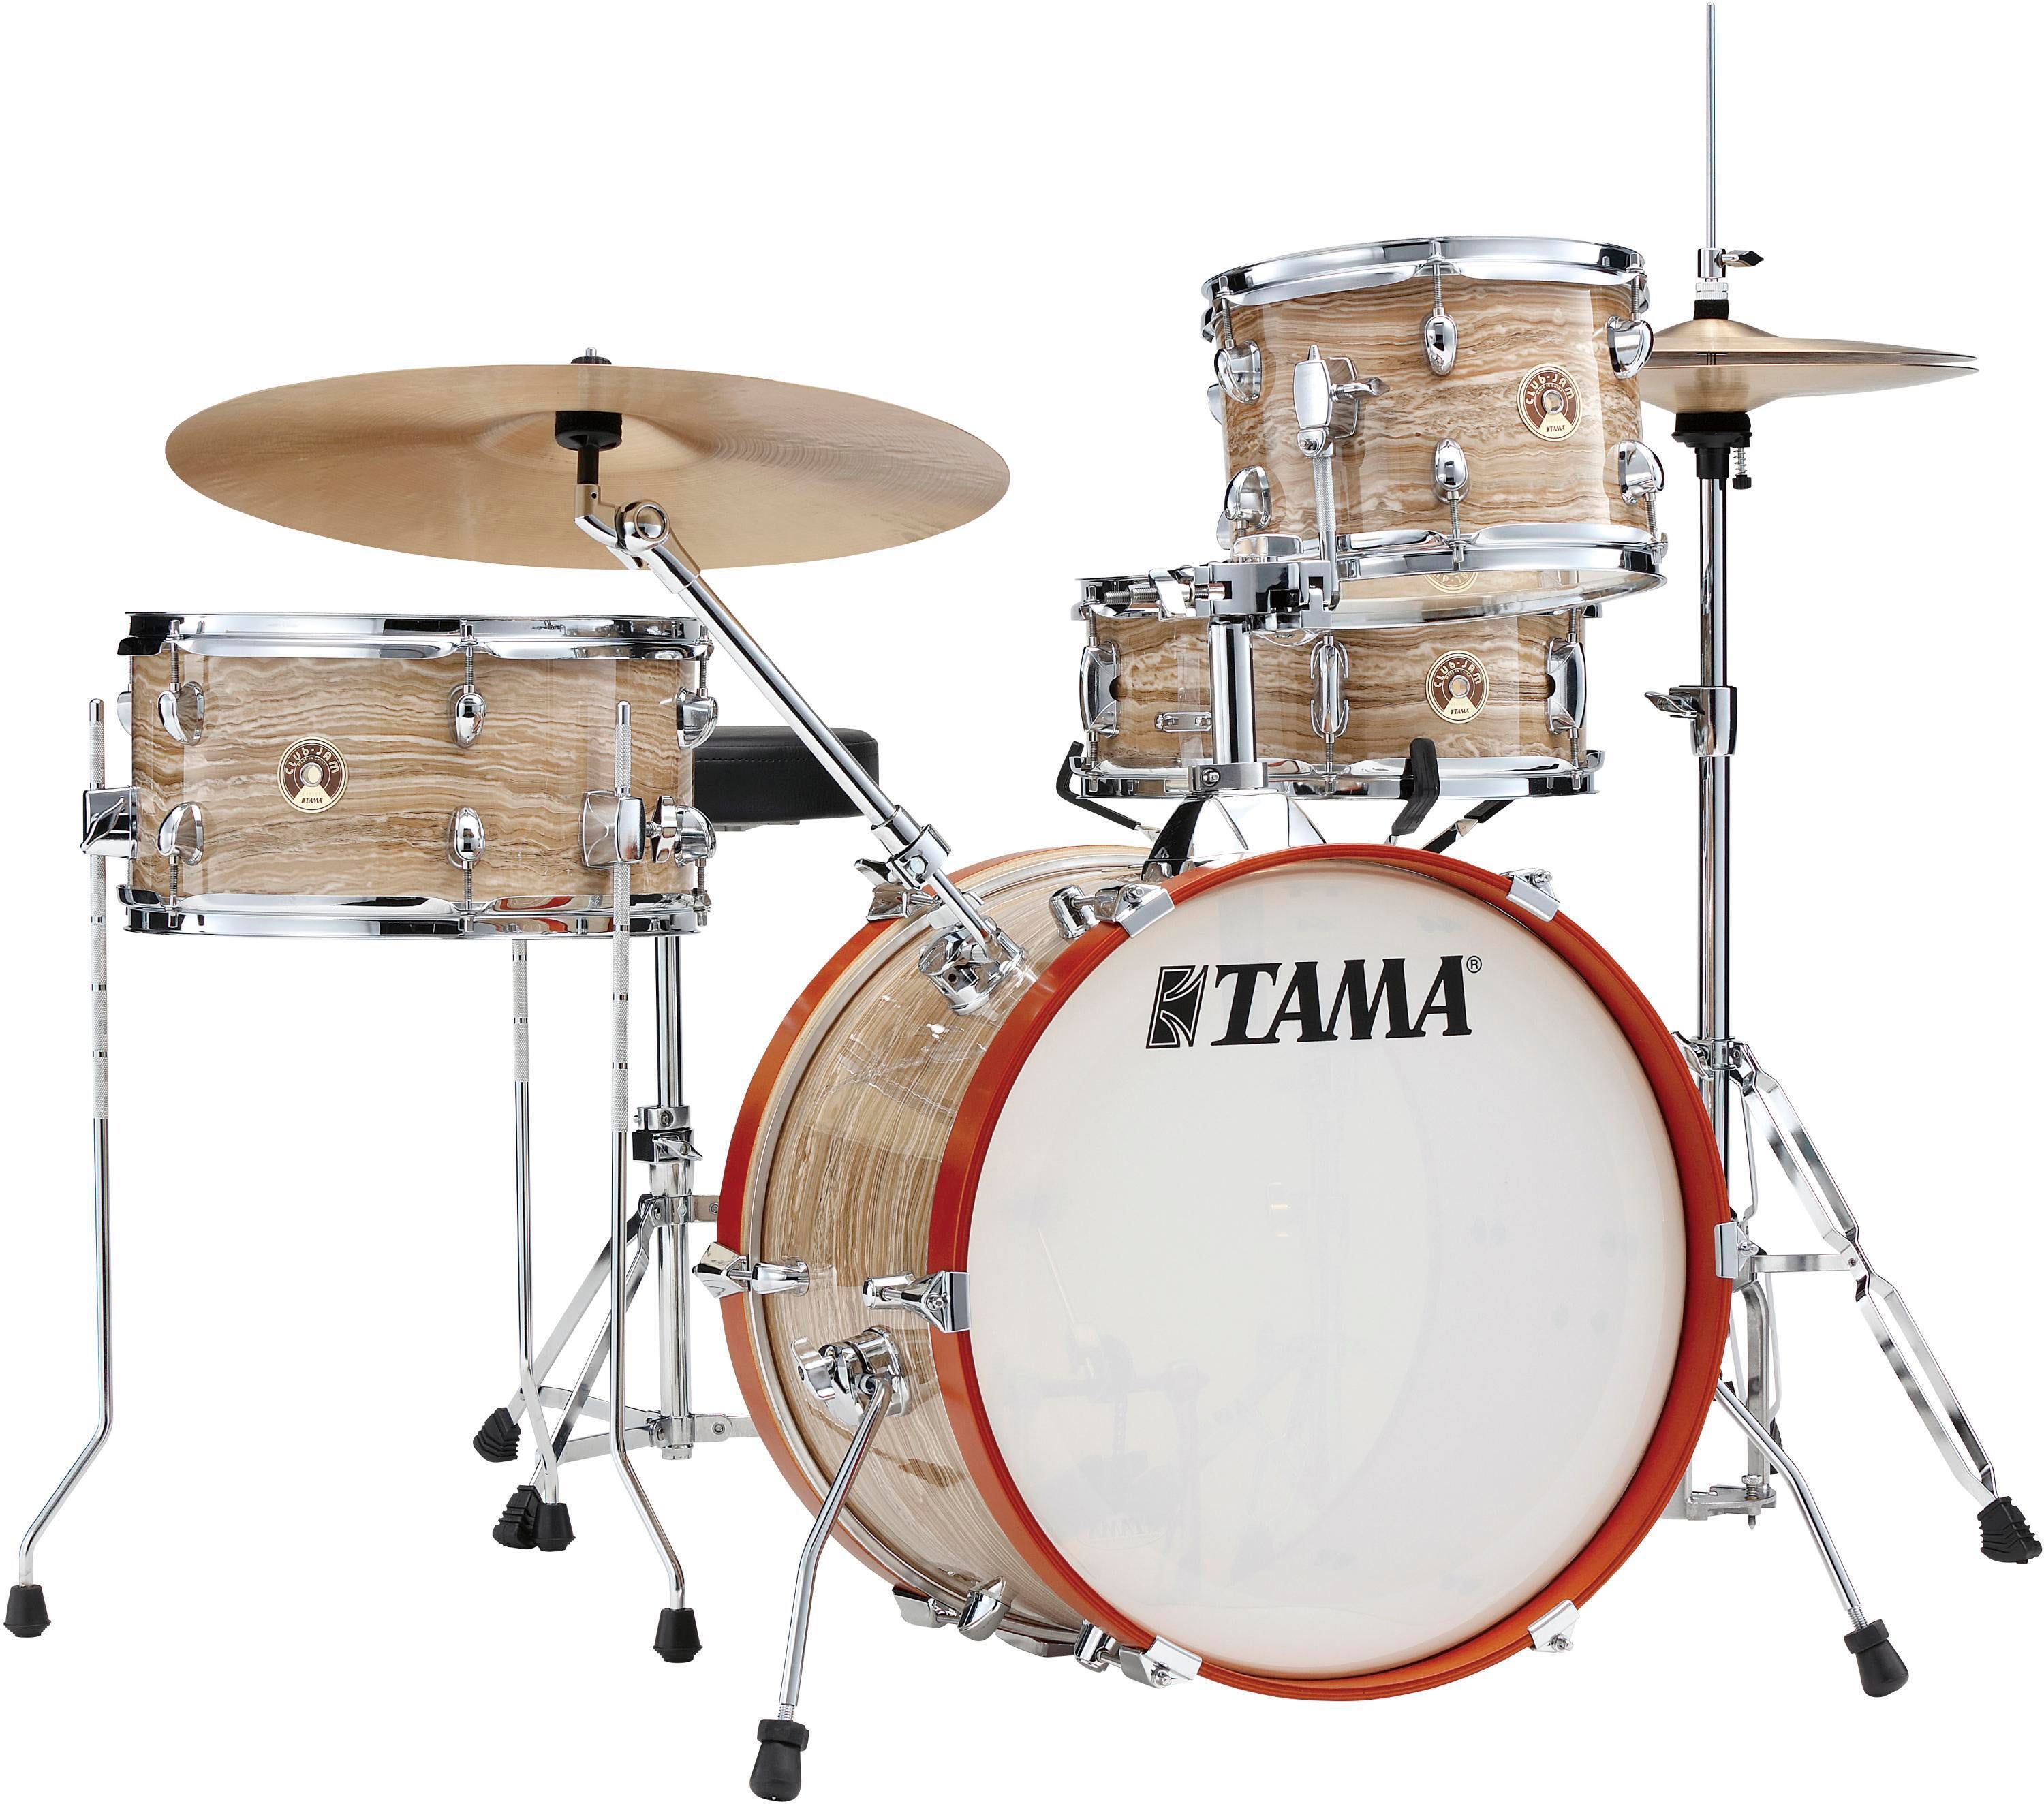 Tama Club-JAM LJK48S 4-piece Shell Pack with Snare Drum - Cream Marble Wrap